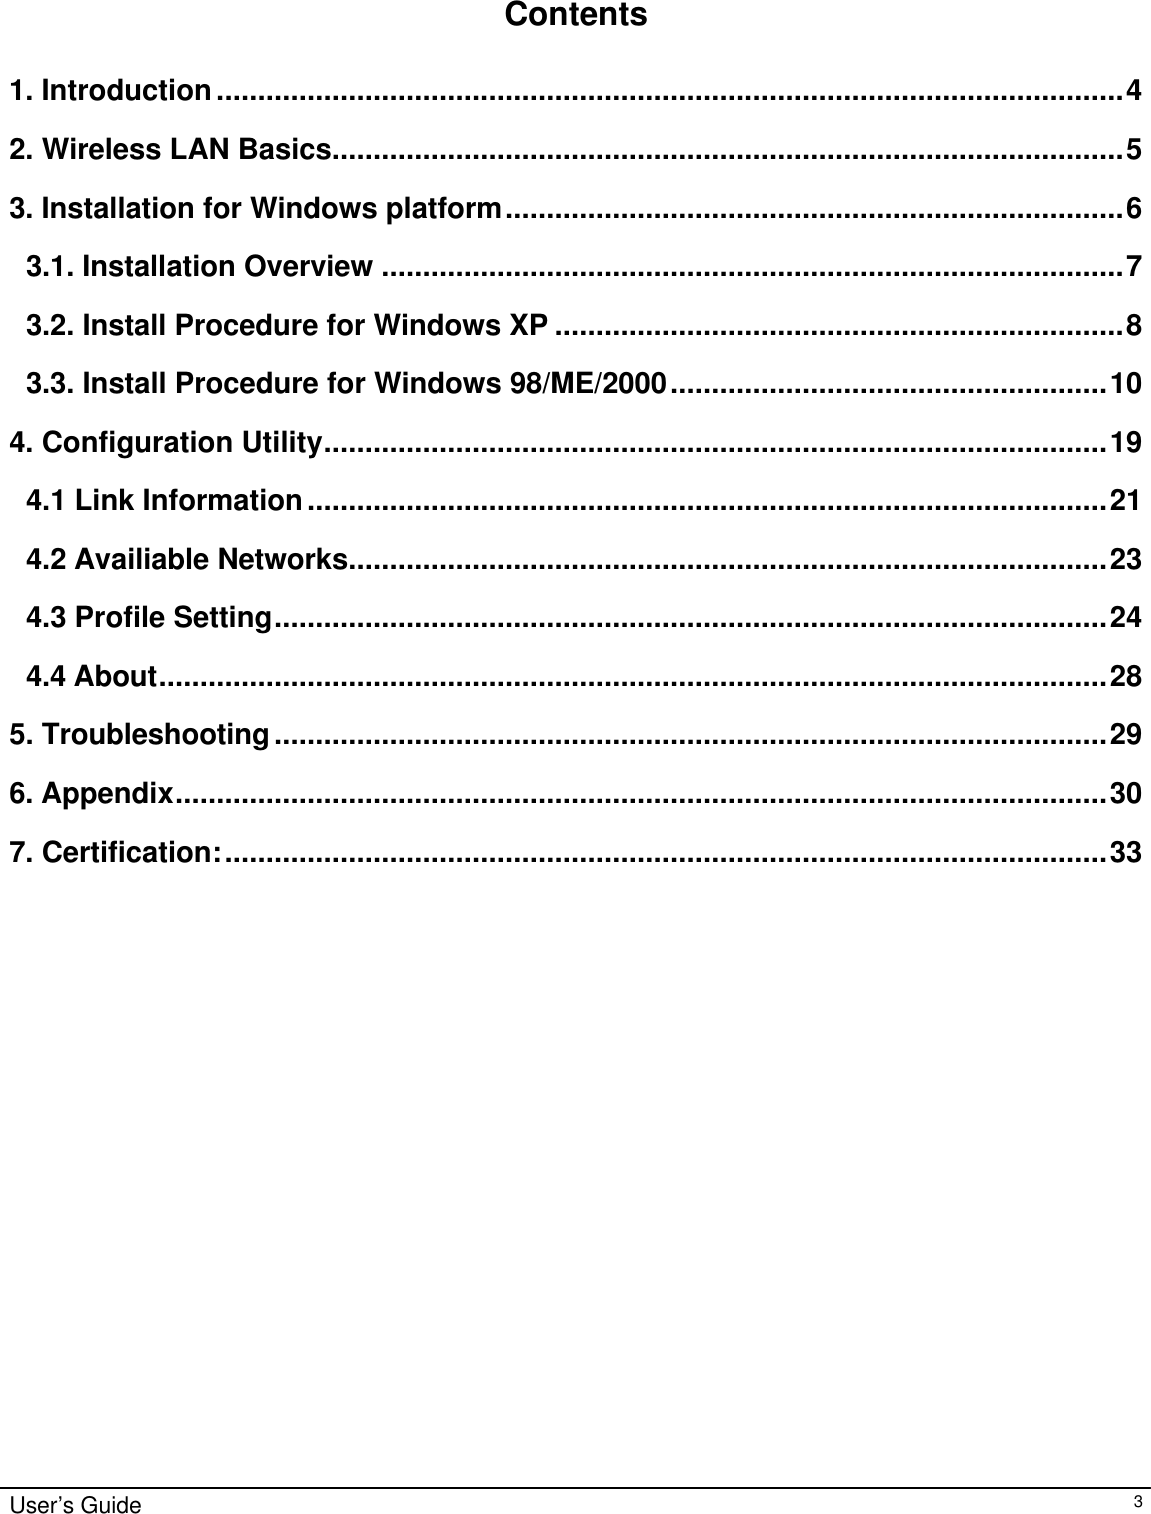                                                                                                                                                                                                                                                                                                                                        User’s Guide   3    Contents  1. Introduction..............................................................................................................4 2. Wireless LAN Basics................................................................................................5 3. Installation for Windows platform...........................................................................6 3.1. Installation Overview ..........................................................................................7 3.2. Install Procedure for Windows XP .....................................................................8 3.3. Install Procedure for Windows 98/ME/2000.....................................................10 4. Configuration Utility...............................................................................................19 4.1 Link Information.................................................................................................21 4.2 Availiable Networks............................................................................................23 4.3 Profile Setting.....................................................................................................24 4.4 About...................................................................................................................28 5. Troubleshooting.....................................................................................................29 6. Appendix.................................................................................................................30 7. Certification:...........................................................................................................33                            